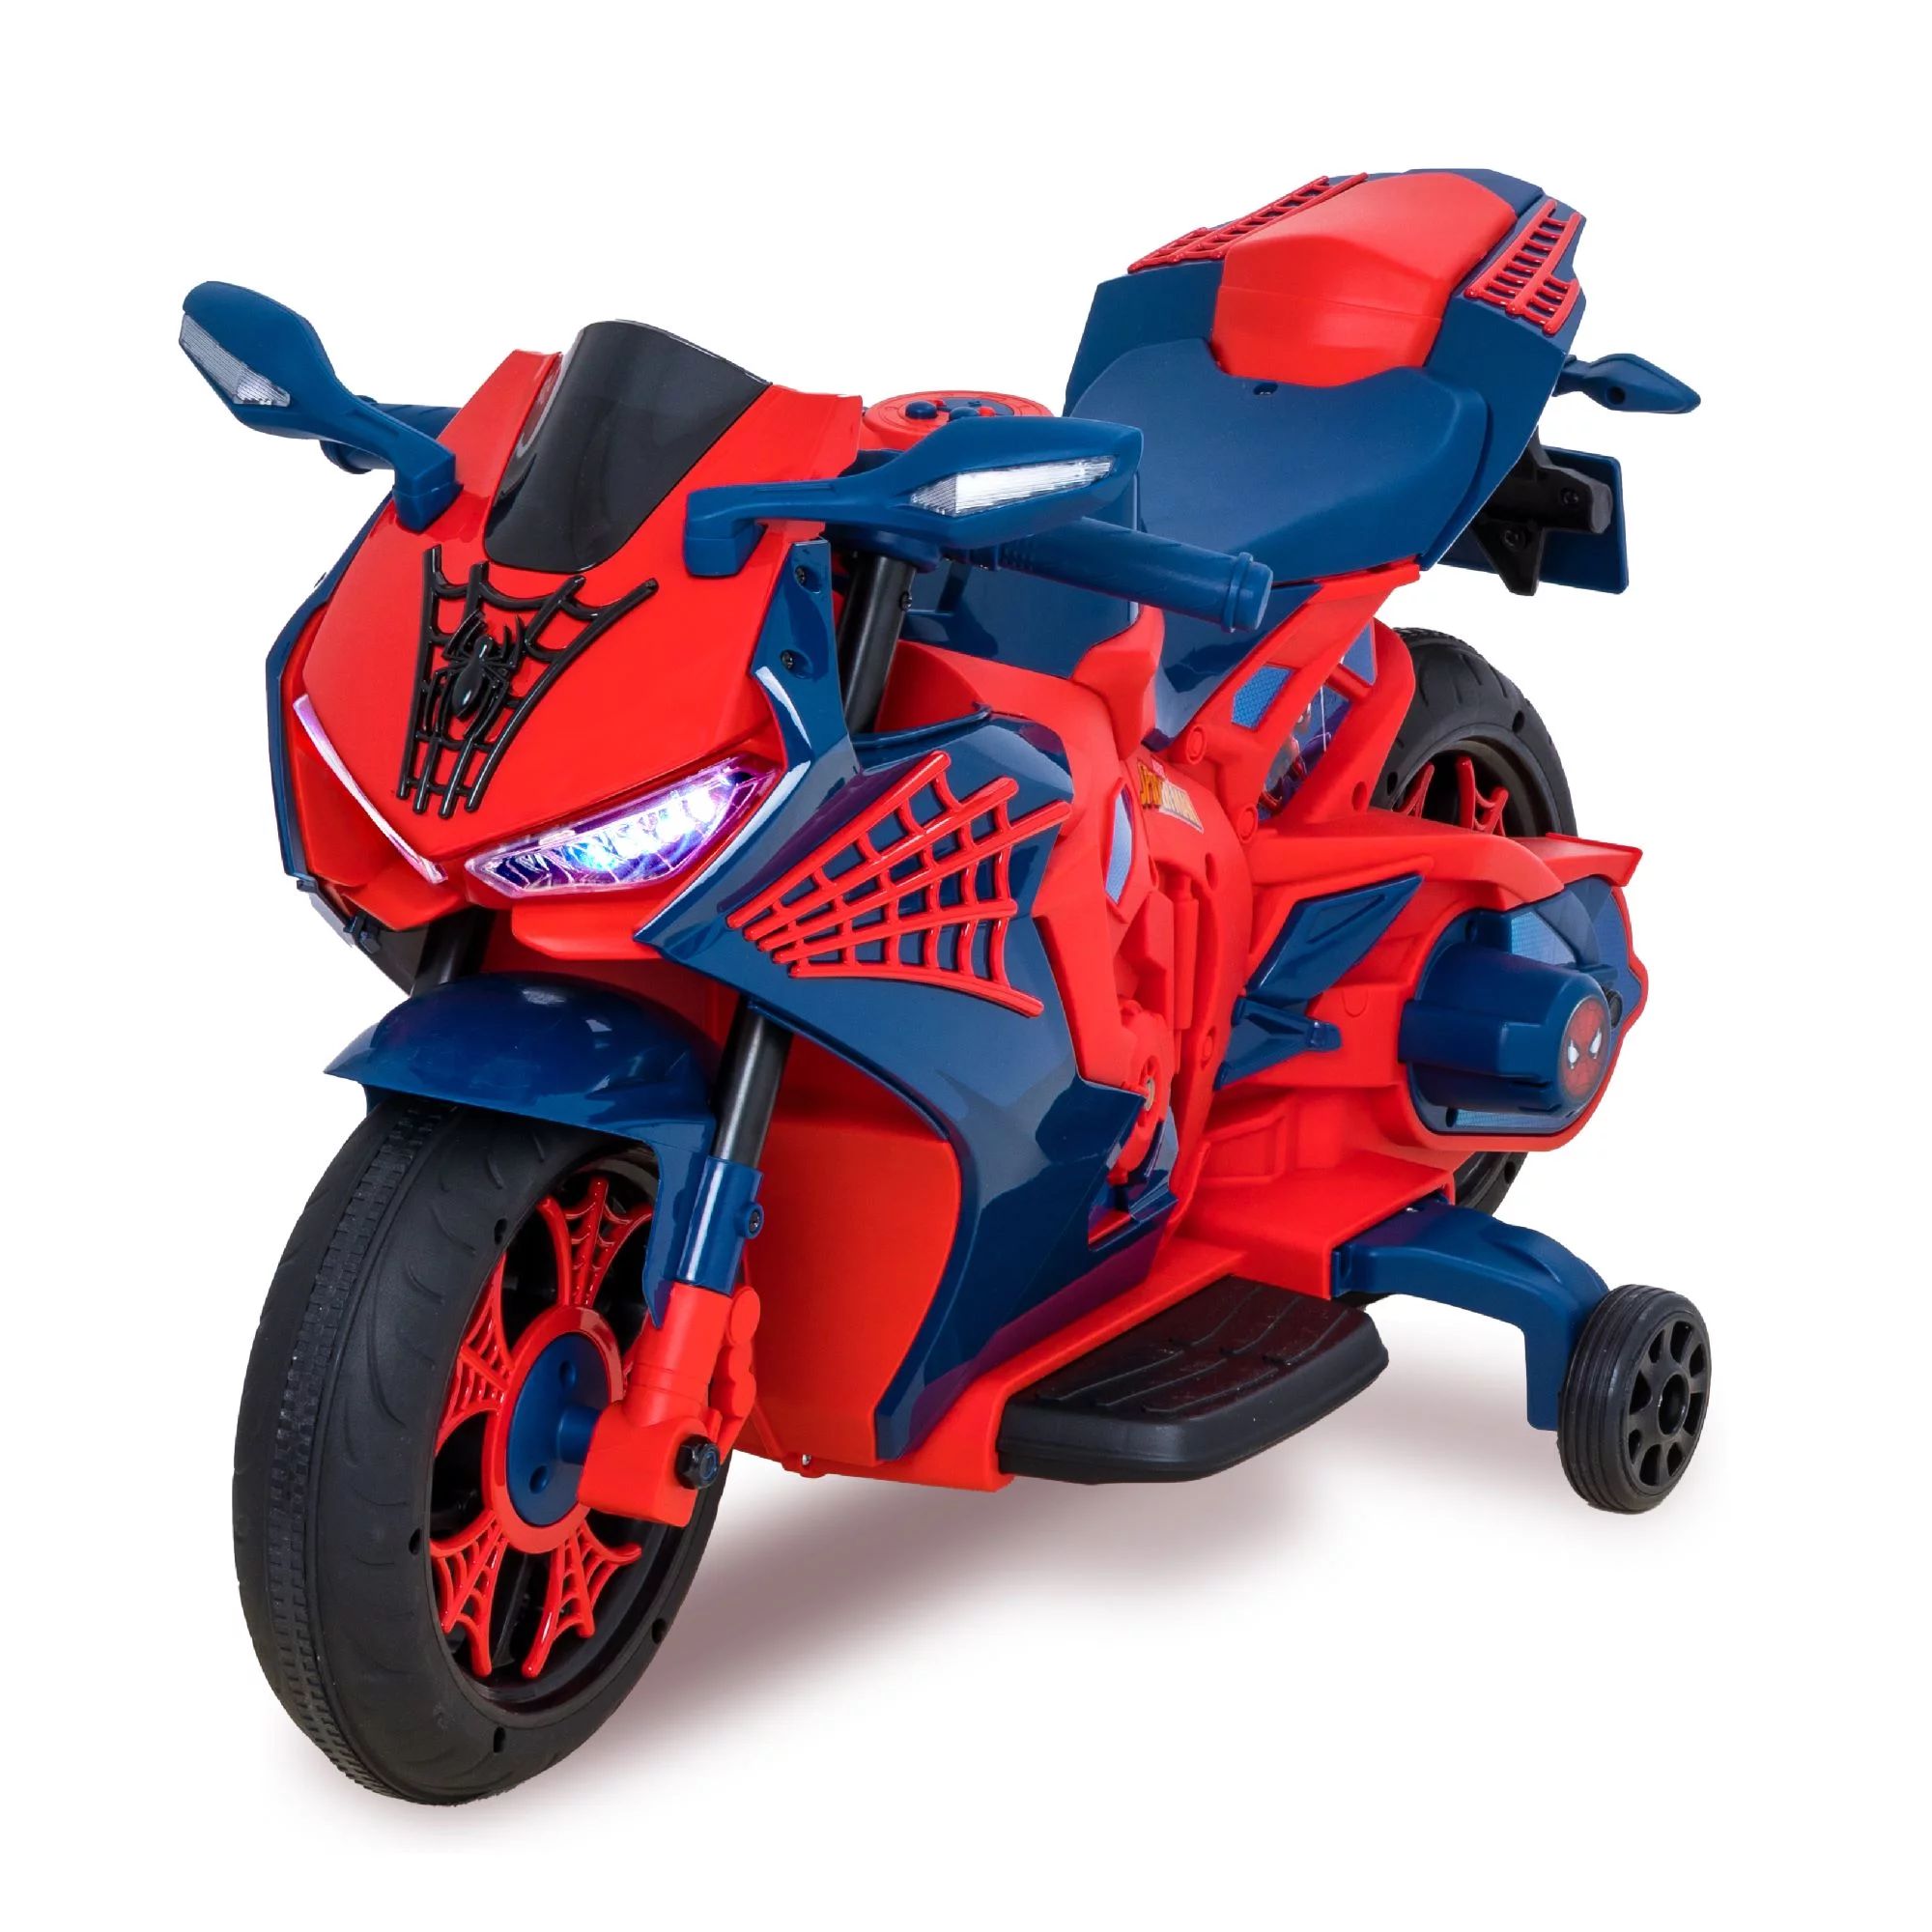 Spiderman 6V Motorcycle Ride On, for Kids, Ages 3+, Rechargeable Battery, up to 65lbs | Walmart (US)